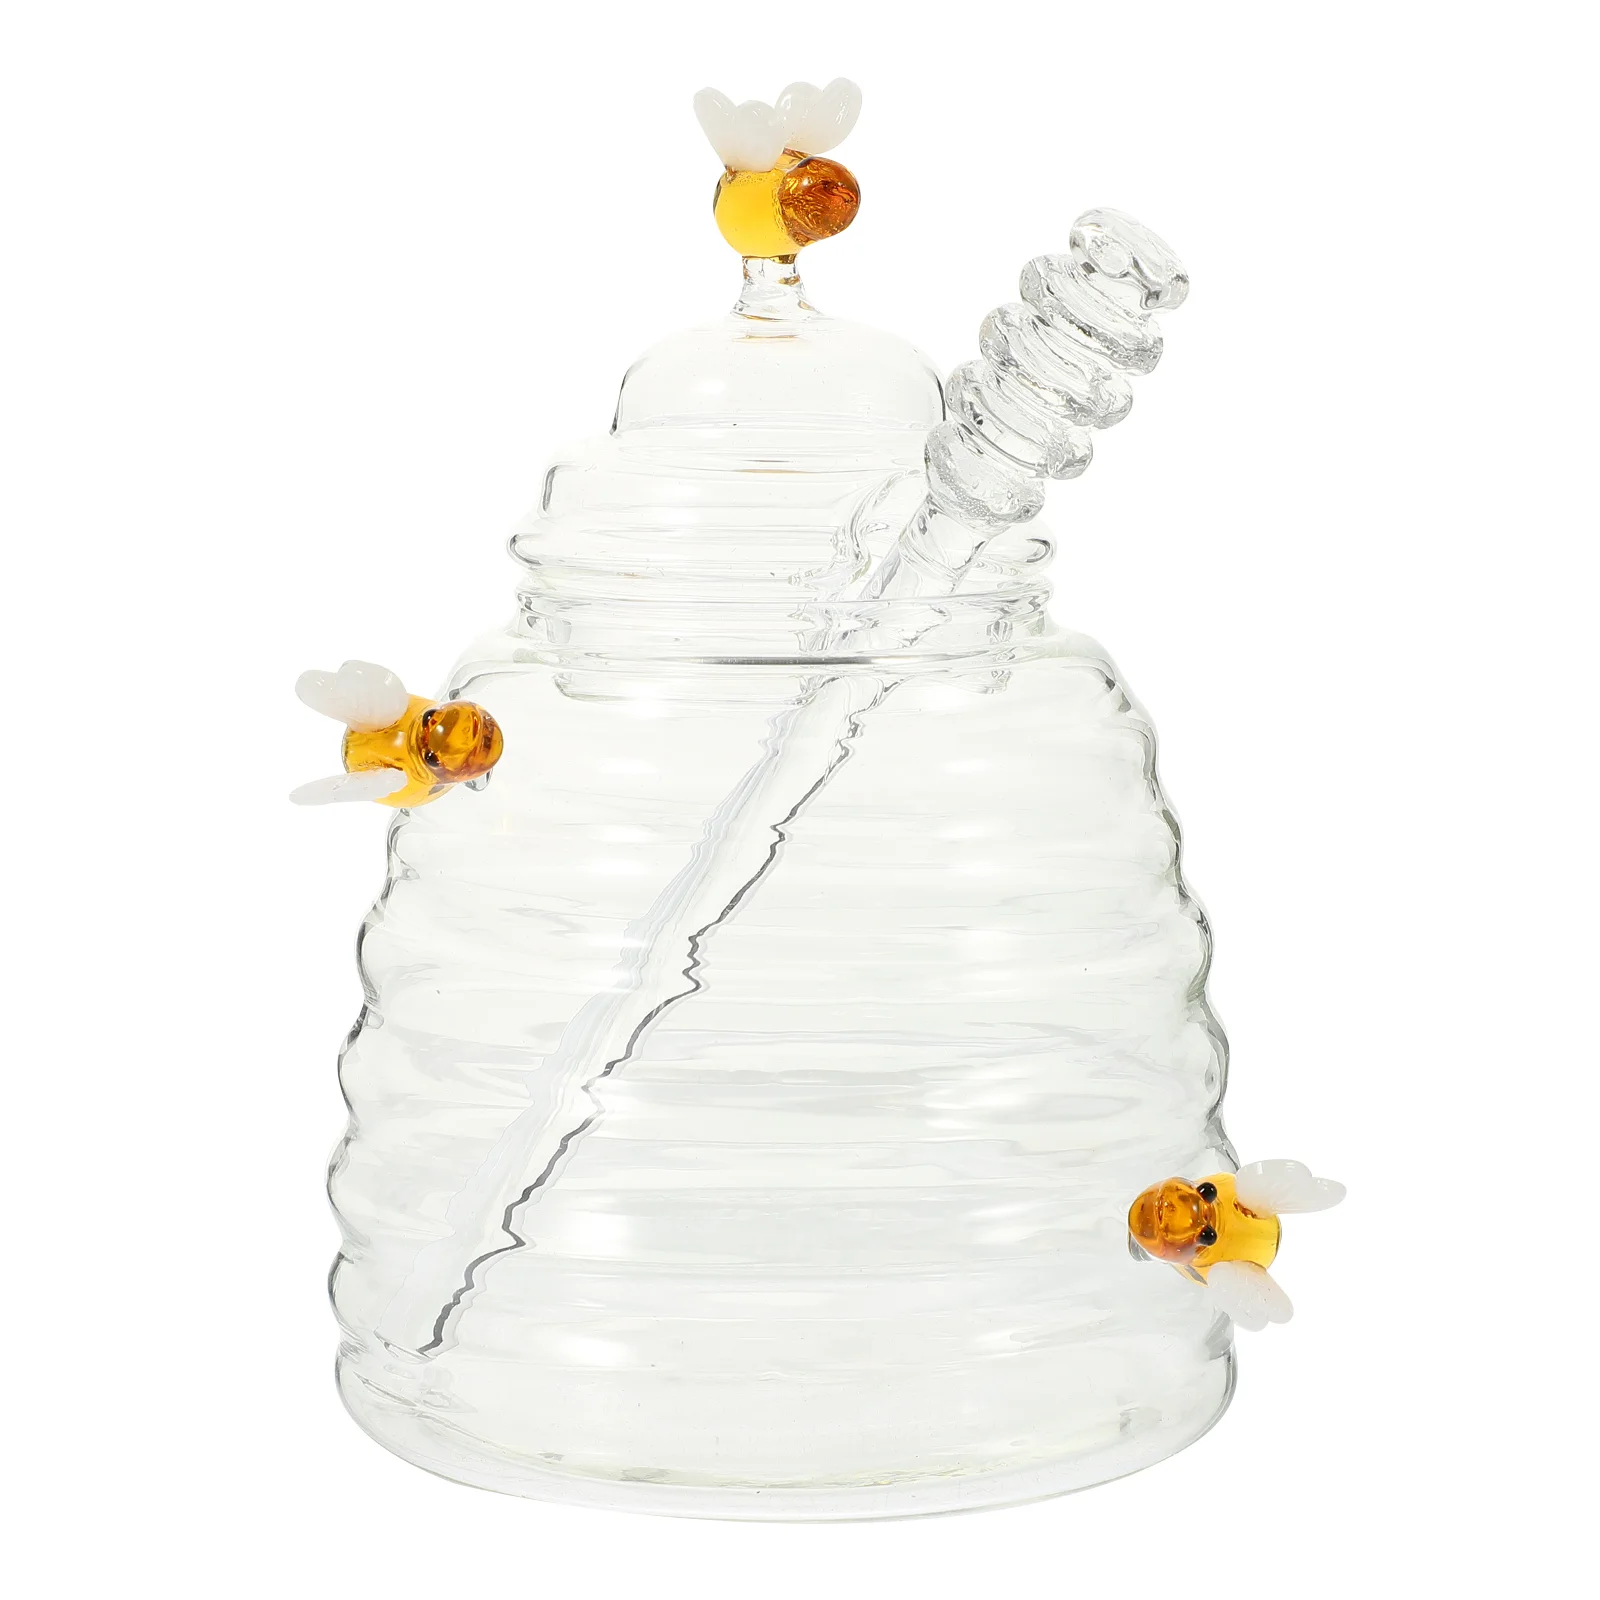 

Honey Glass Jar Jars Pot Storage Dipper With Dispenser Jam Containers Bottle Syrup Emptycontainer Sugar Holder Lids Hive